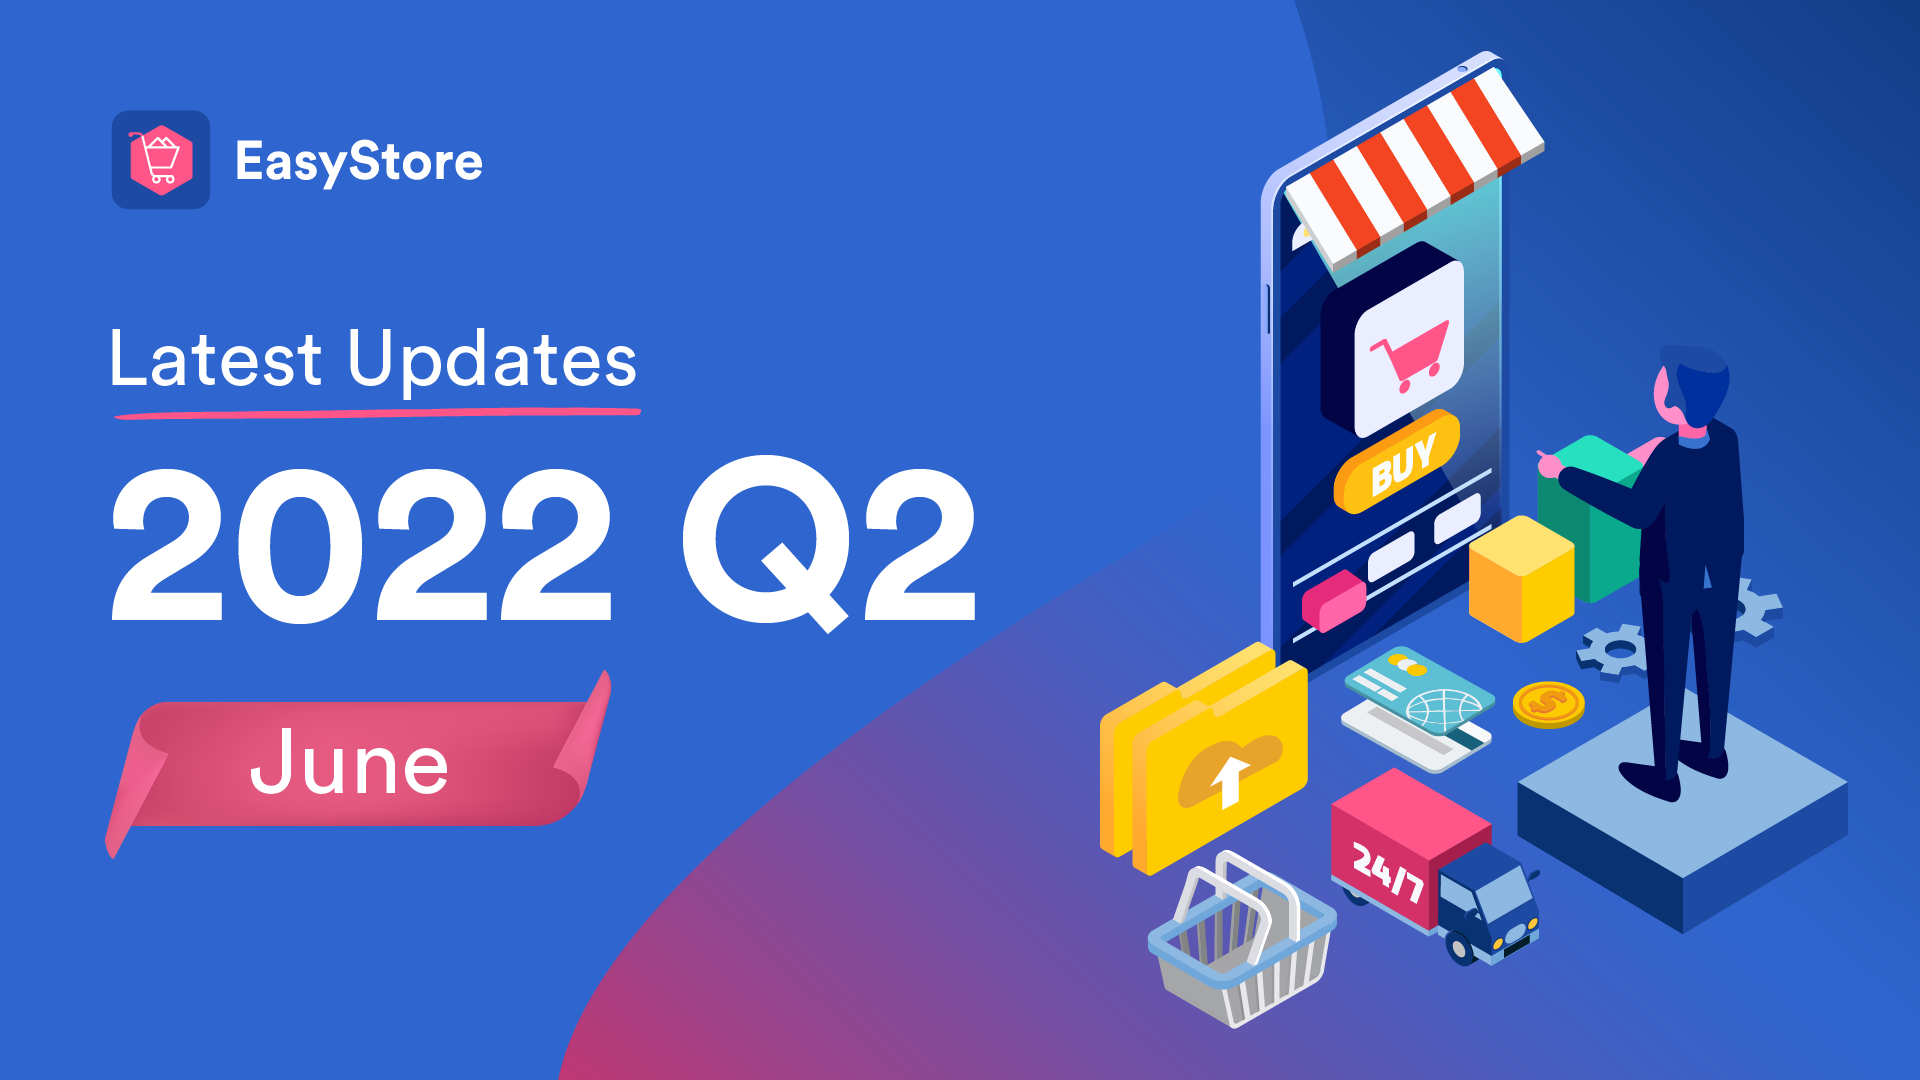 EasyStore Latest Updates: June 2022 | EasyStore